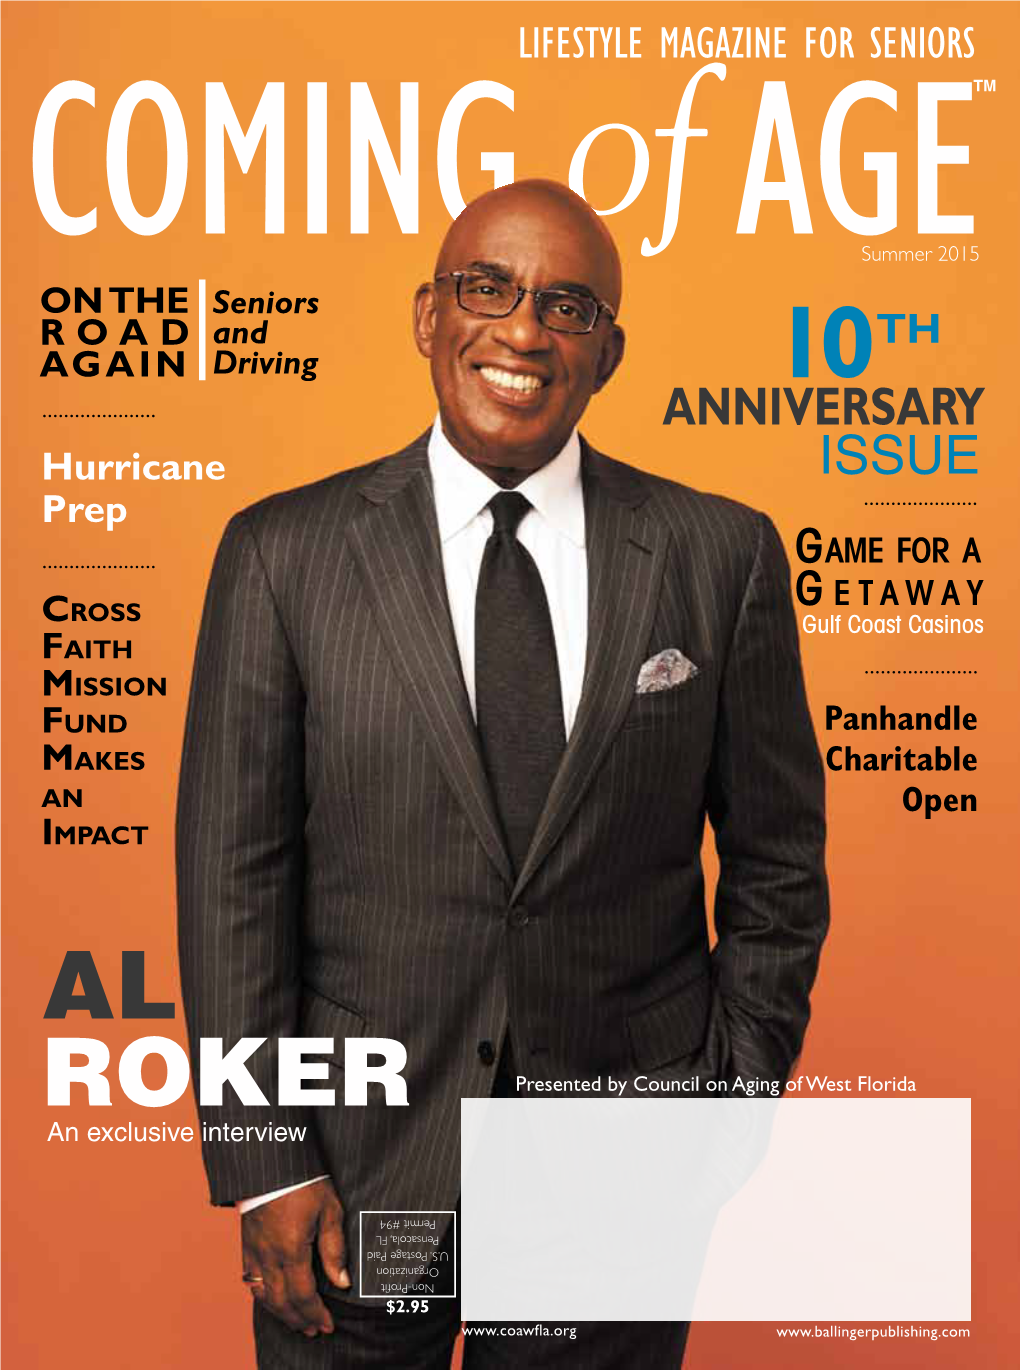 AL Roker Presented by Council on Aging of West Florida